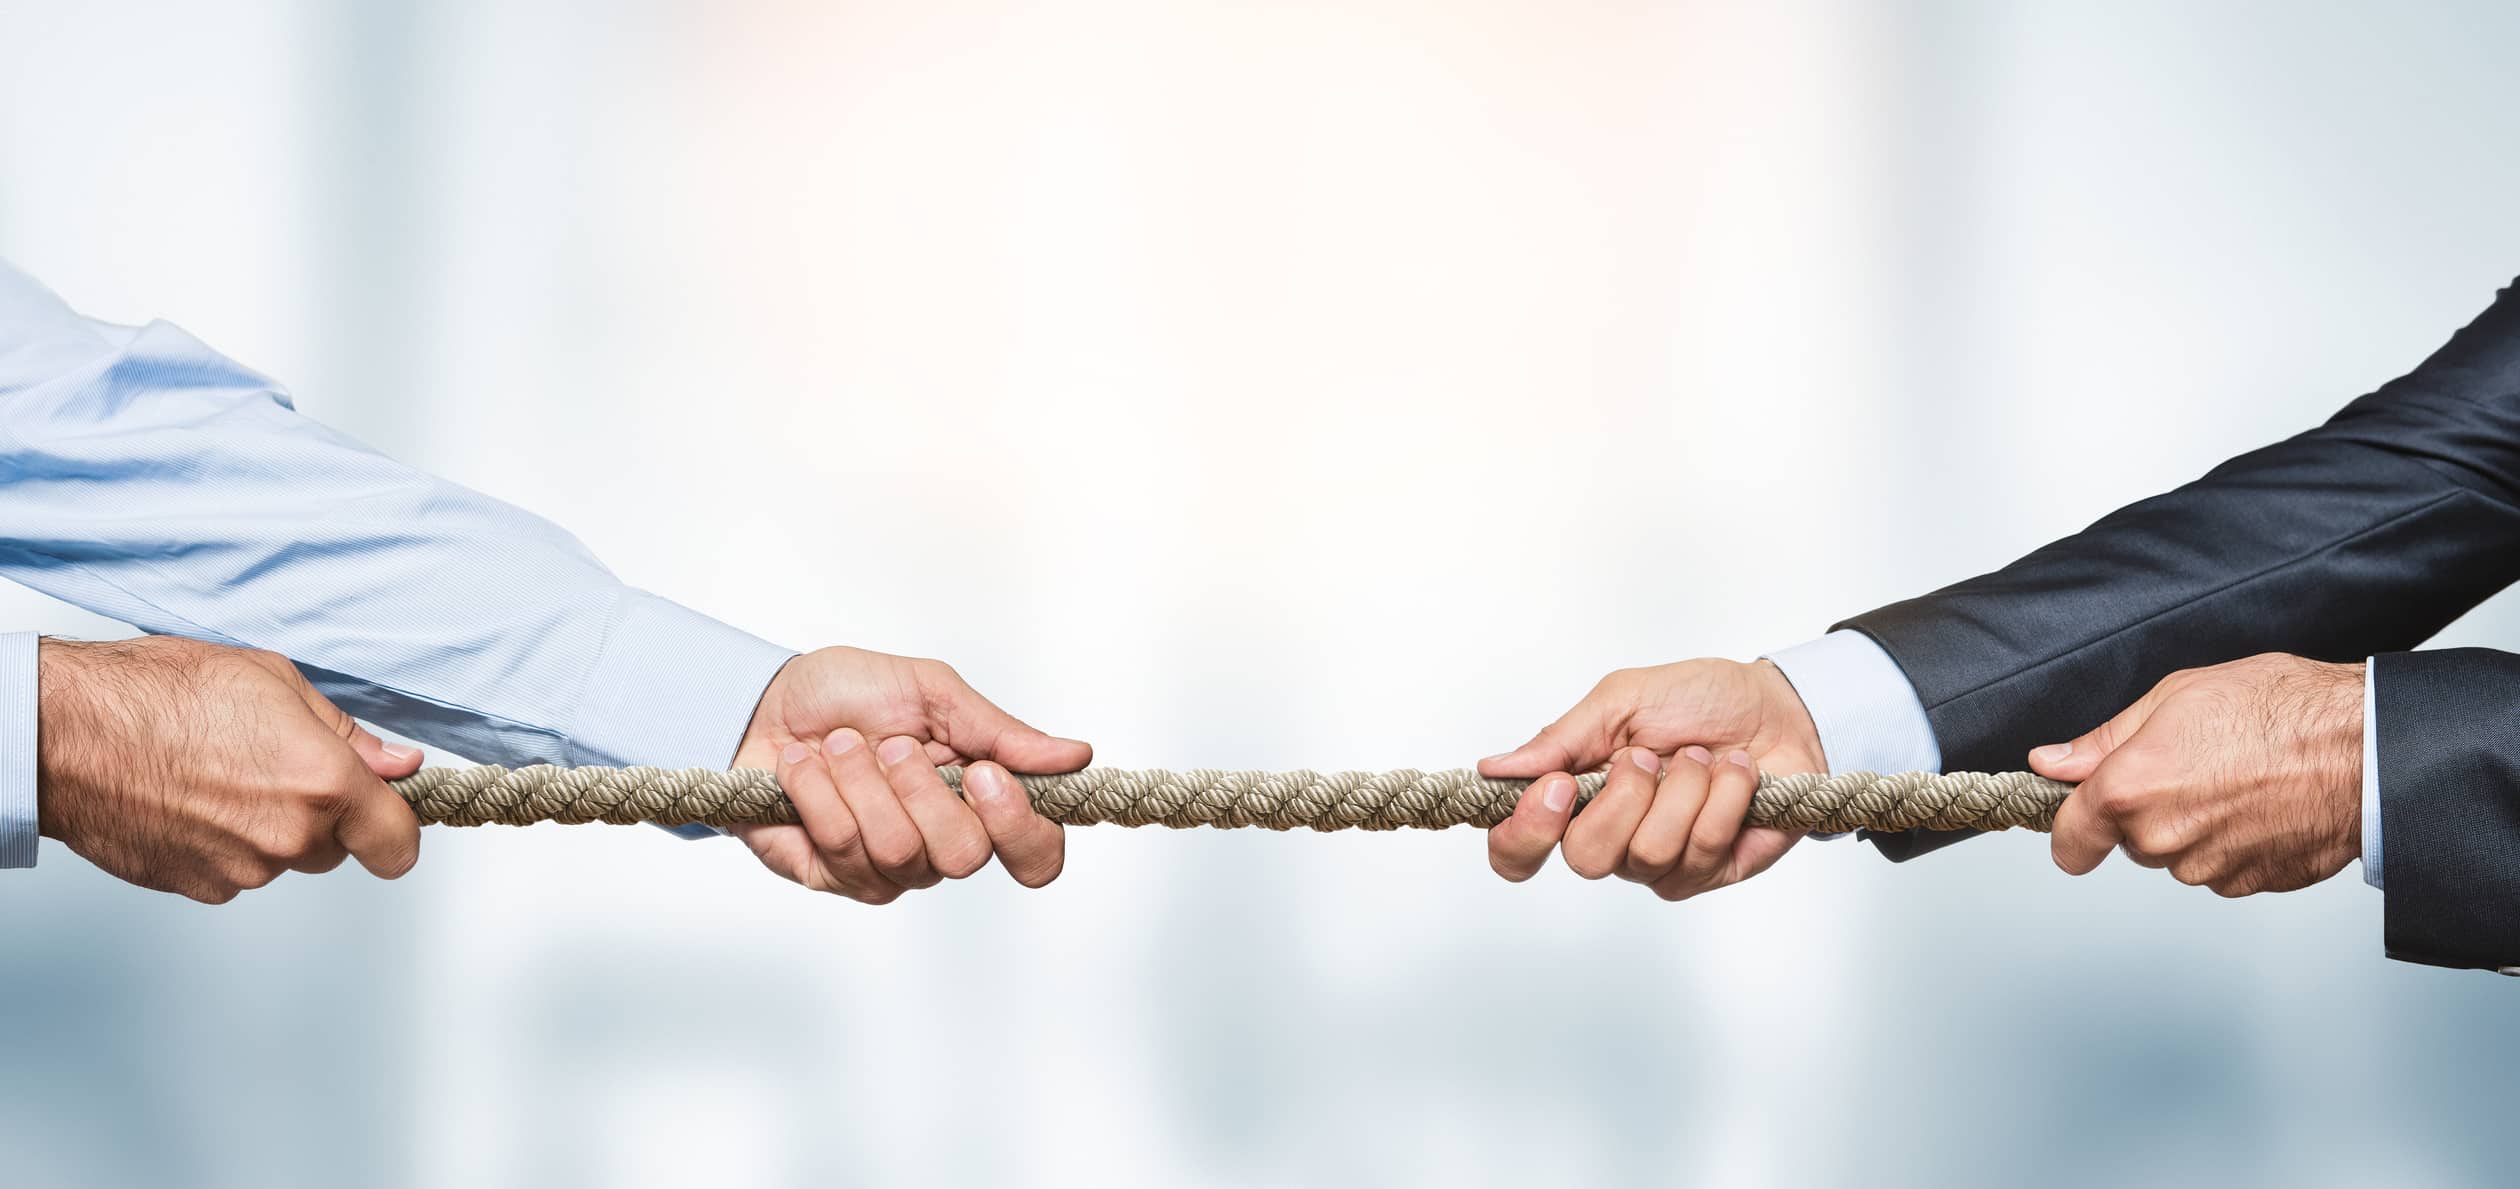 How To Change the CEO-CMO Relationship From Rivals to Teammates